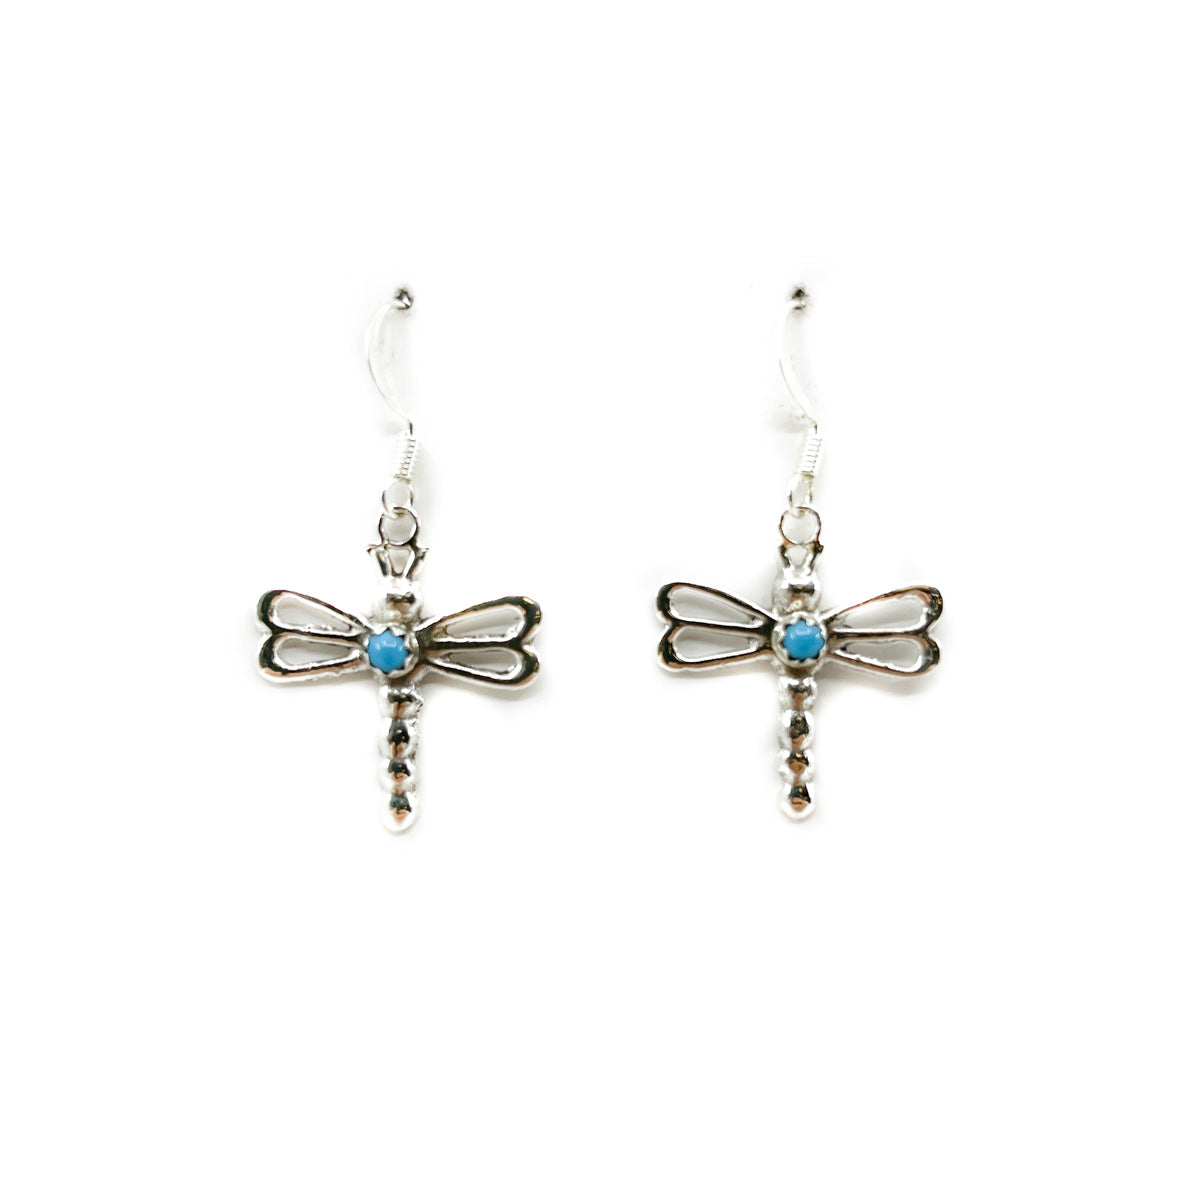 Sterling silver mini-dragonfly earrings with genuine turquoise stone By Bruce Chee, Diné jeweler Measures approximately 7/8 of an inch long and 7/8 of an inch wide at wingspan Dangles from ear approximately 1.5 inches